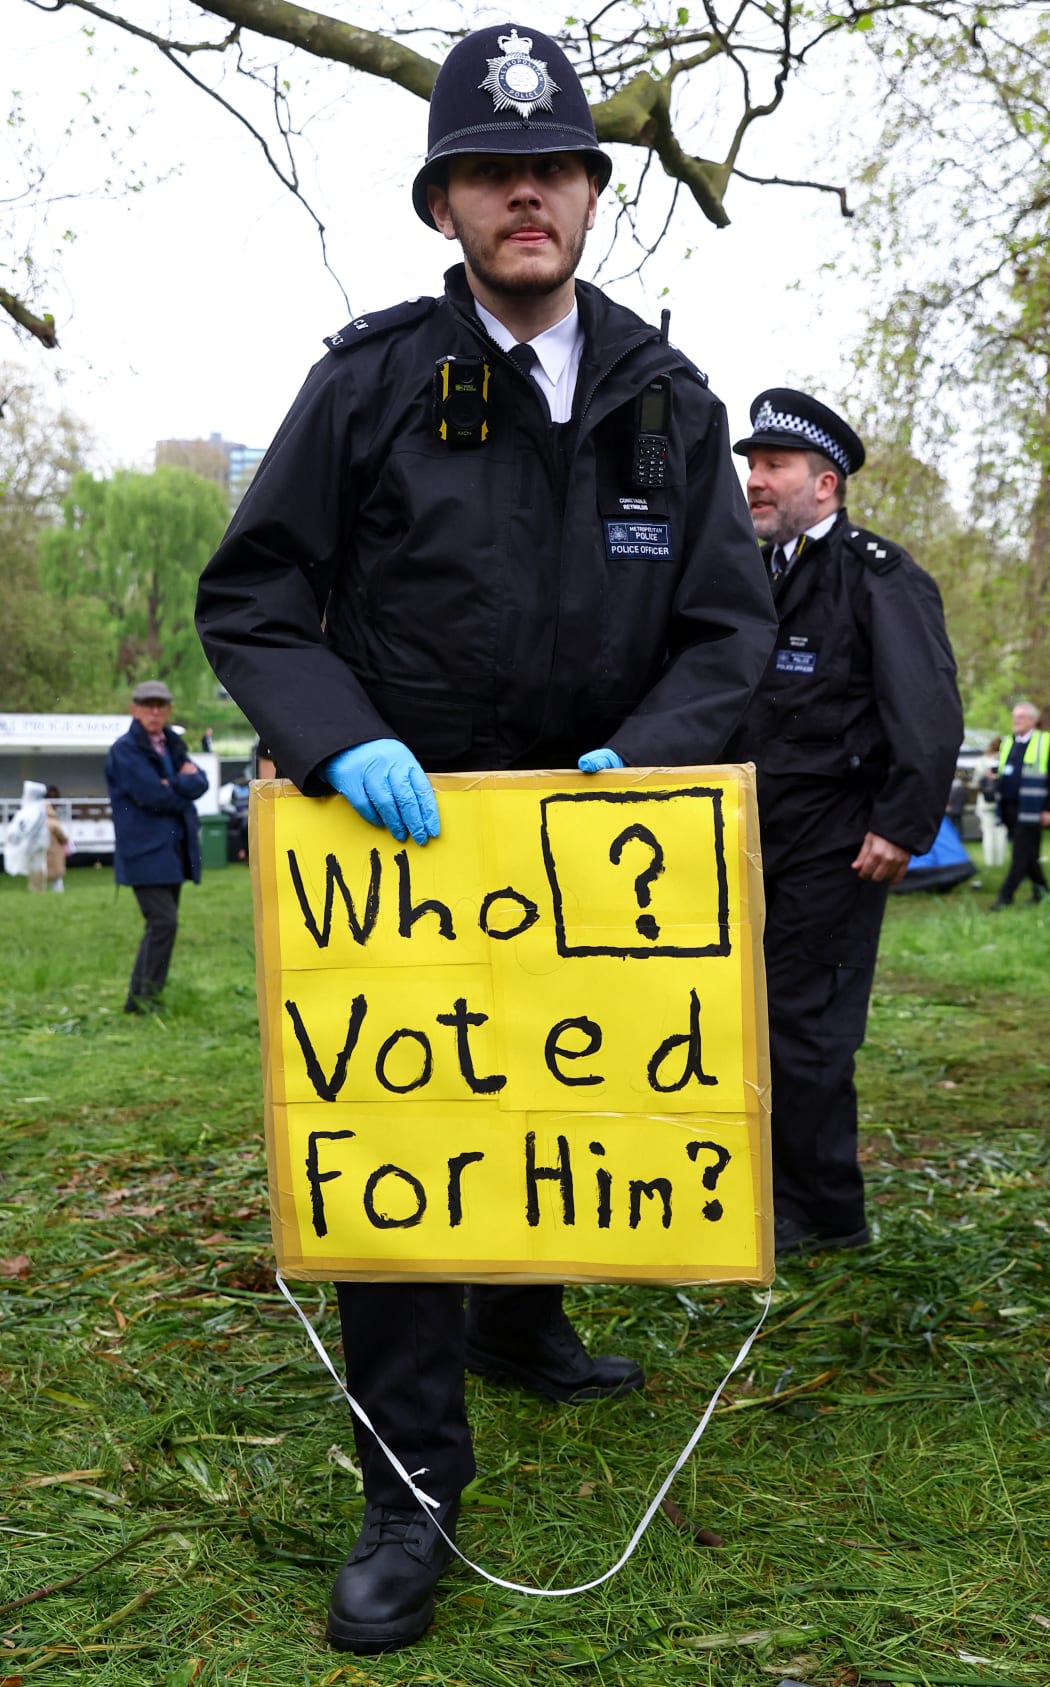 A police officer holds a placard taken from an anti-monarchy protester as people gather at the Mall on the day of the coronation of Britain's King Charles III and Queen Camilla, in London, on May 6, 2023. - The set-piece coronation is the first in Britain in 70 years, and only the second in history to be televised. Charles will be the 40th reigning monarch to be crowned at the central London church since King William I in 1066. Outside the UK, he is also king of 14 other Commonwealth countries, including Australia, Canada and New Zealand. Camilla, his second wife, will be crowned queen alongside him and be known as Queen Camilla after the ceremony. (Photo by PAUL CHILDS / POOL / AFP)